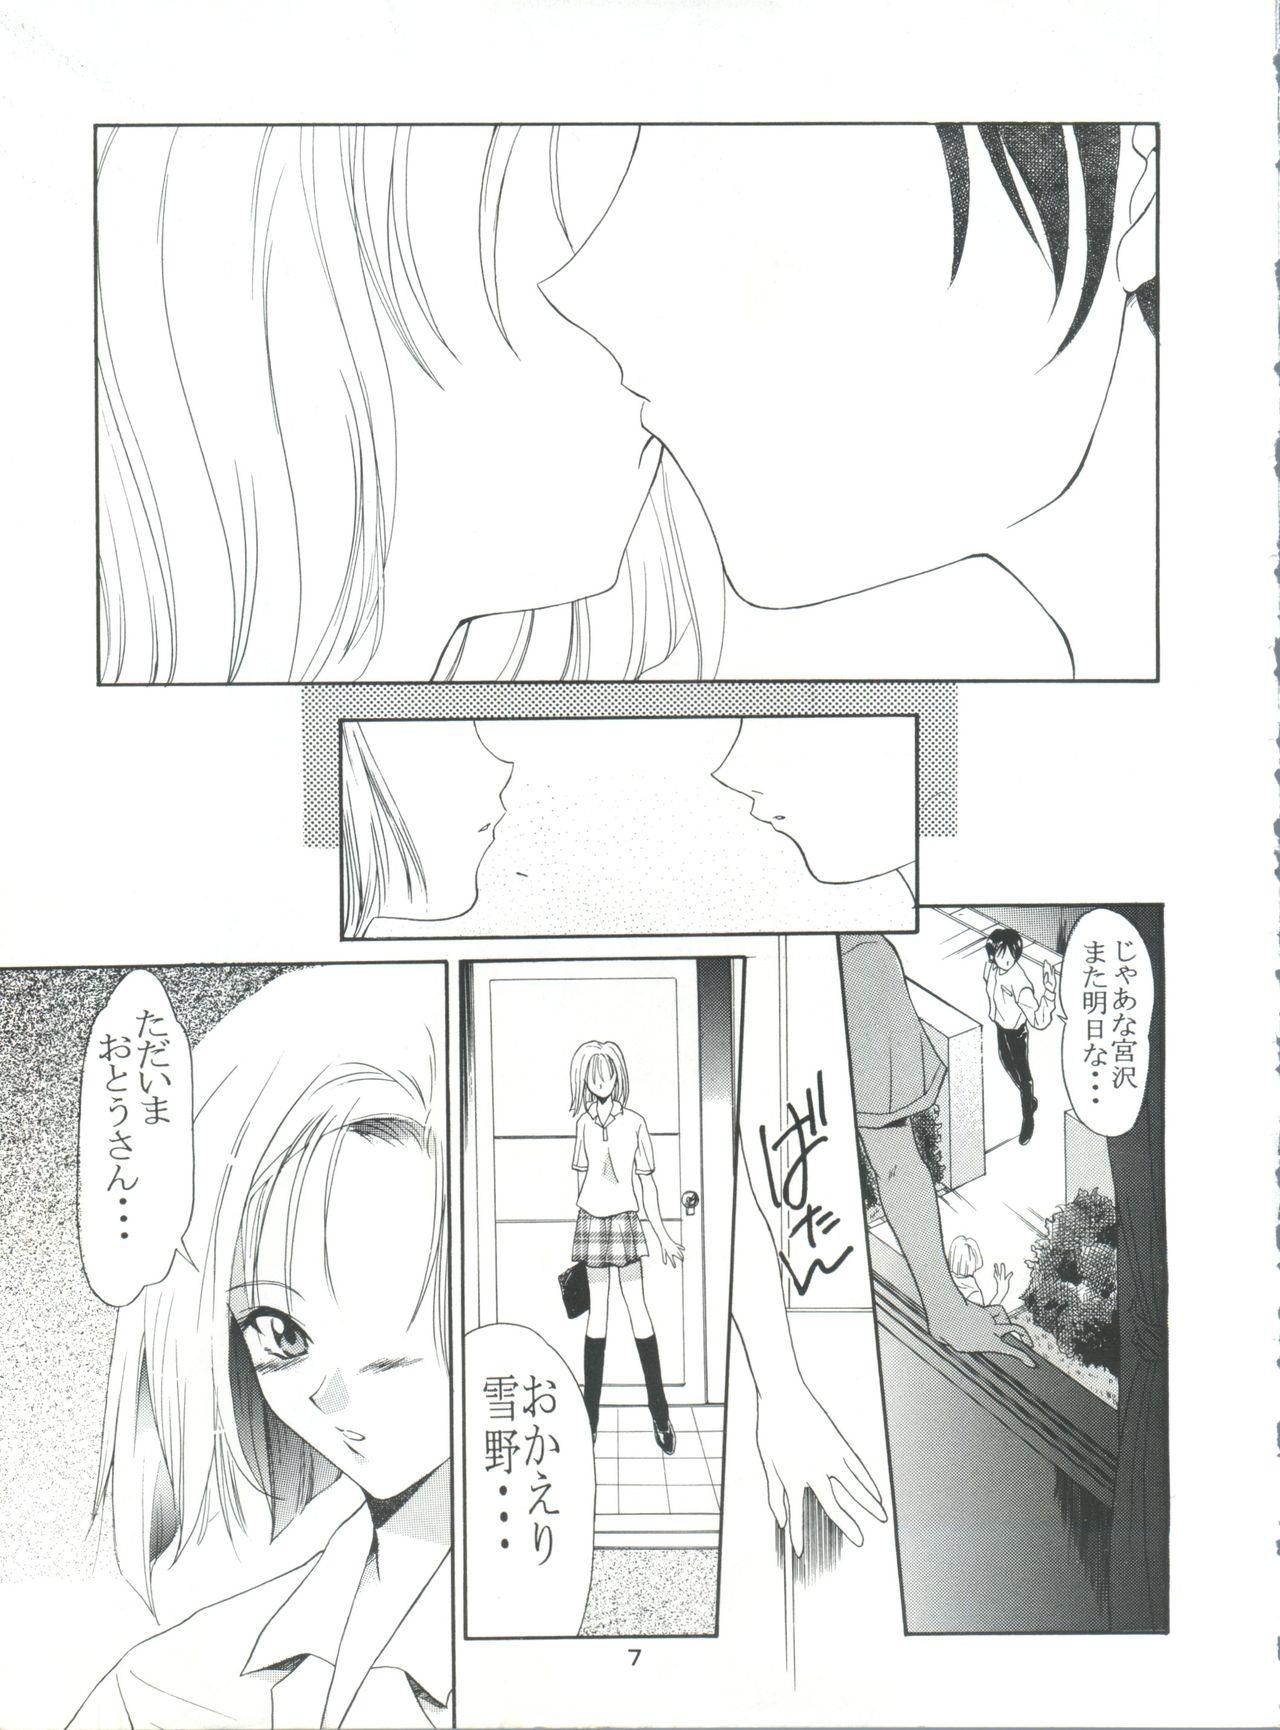 Jerkoff Boys and Girls - White album Kare kano Ameture Porn - Page 7